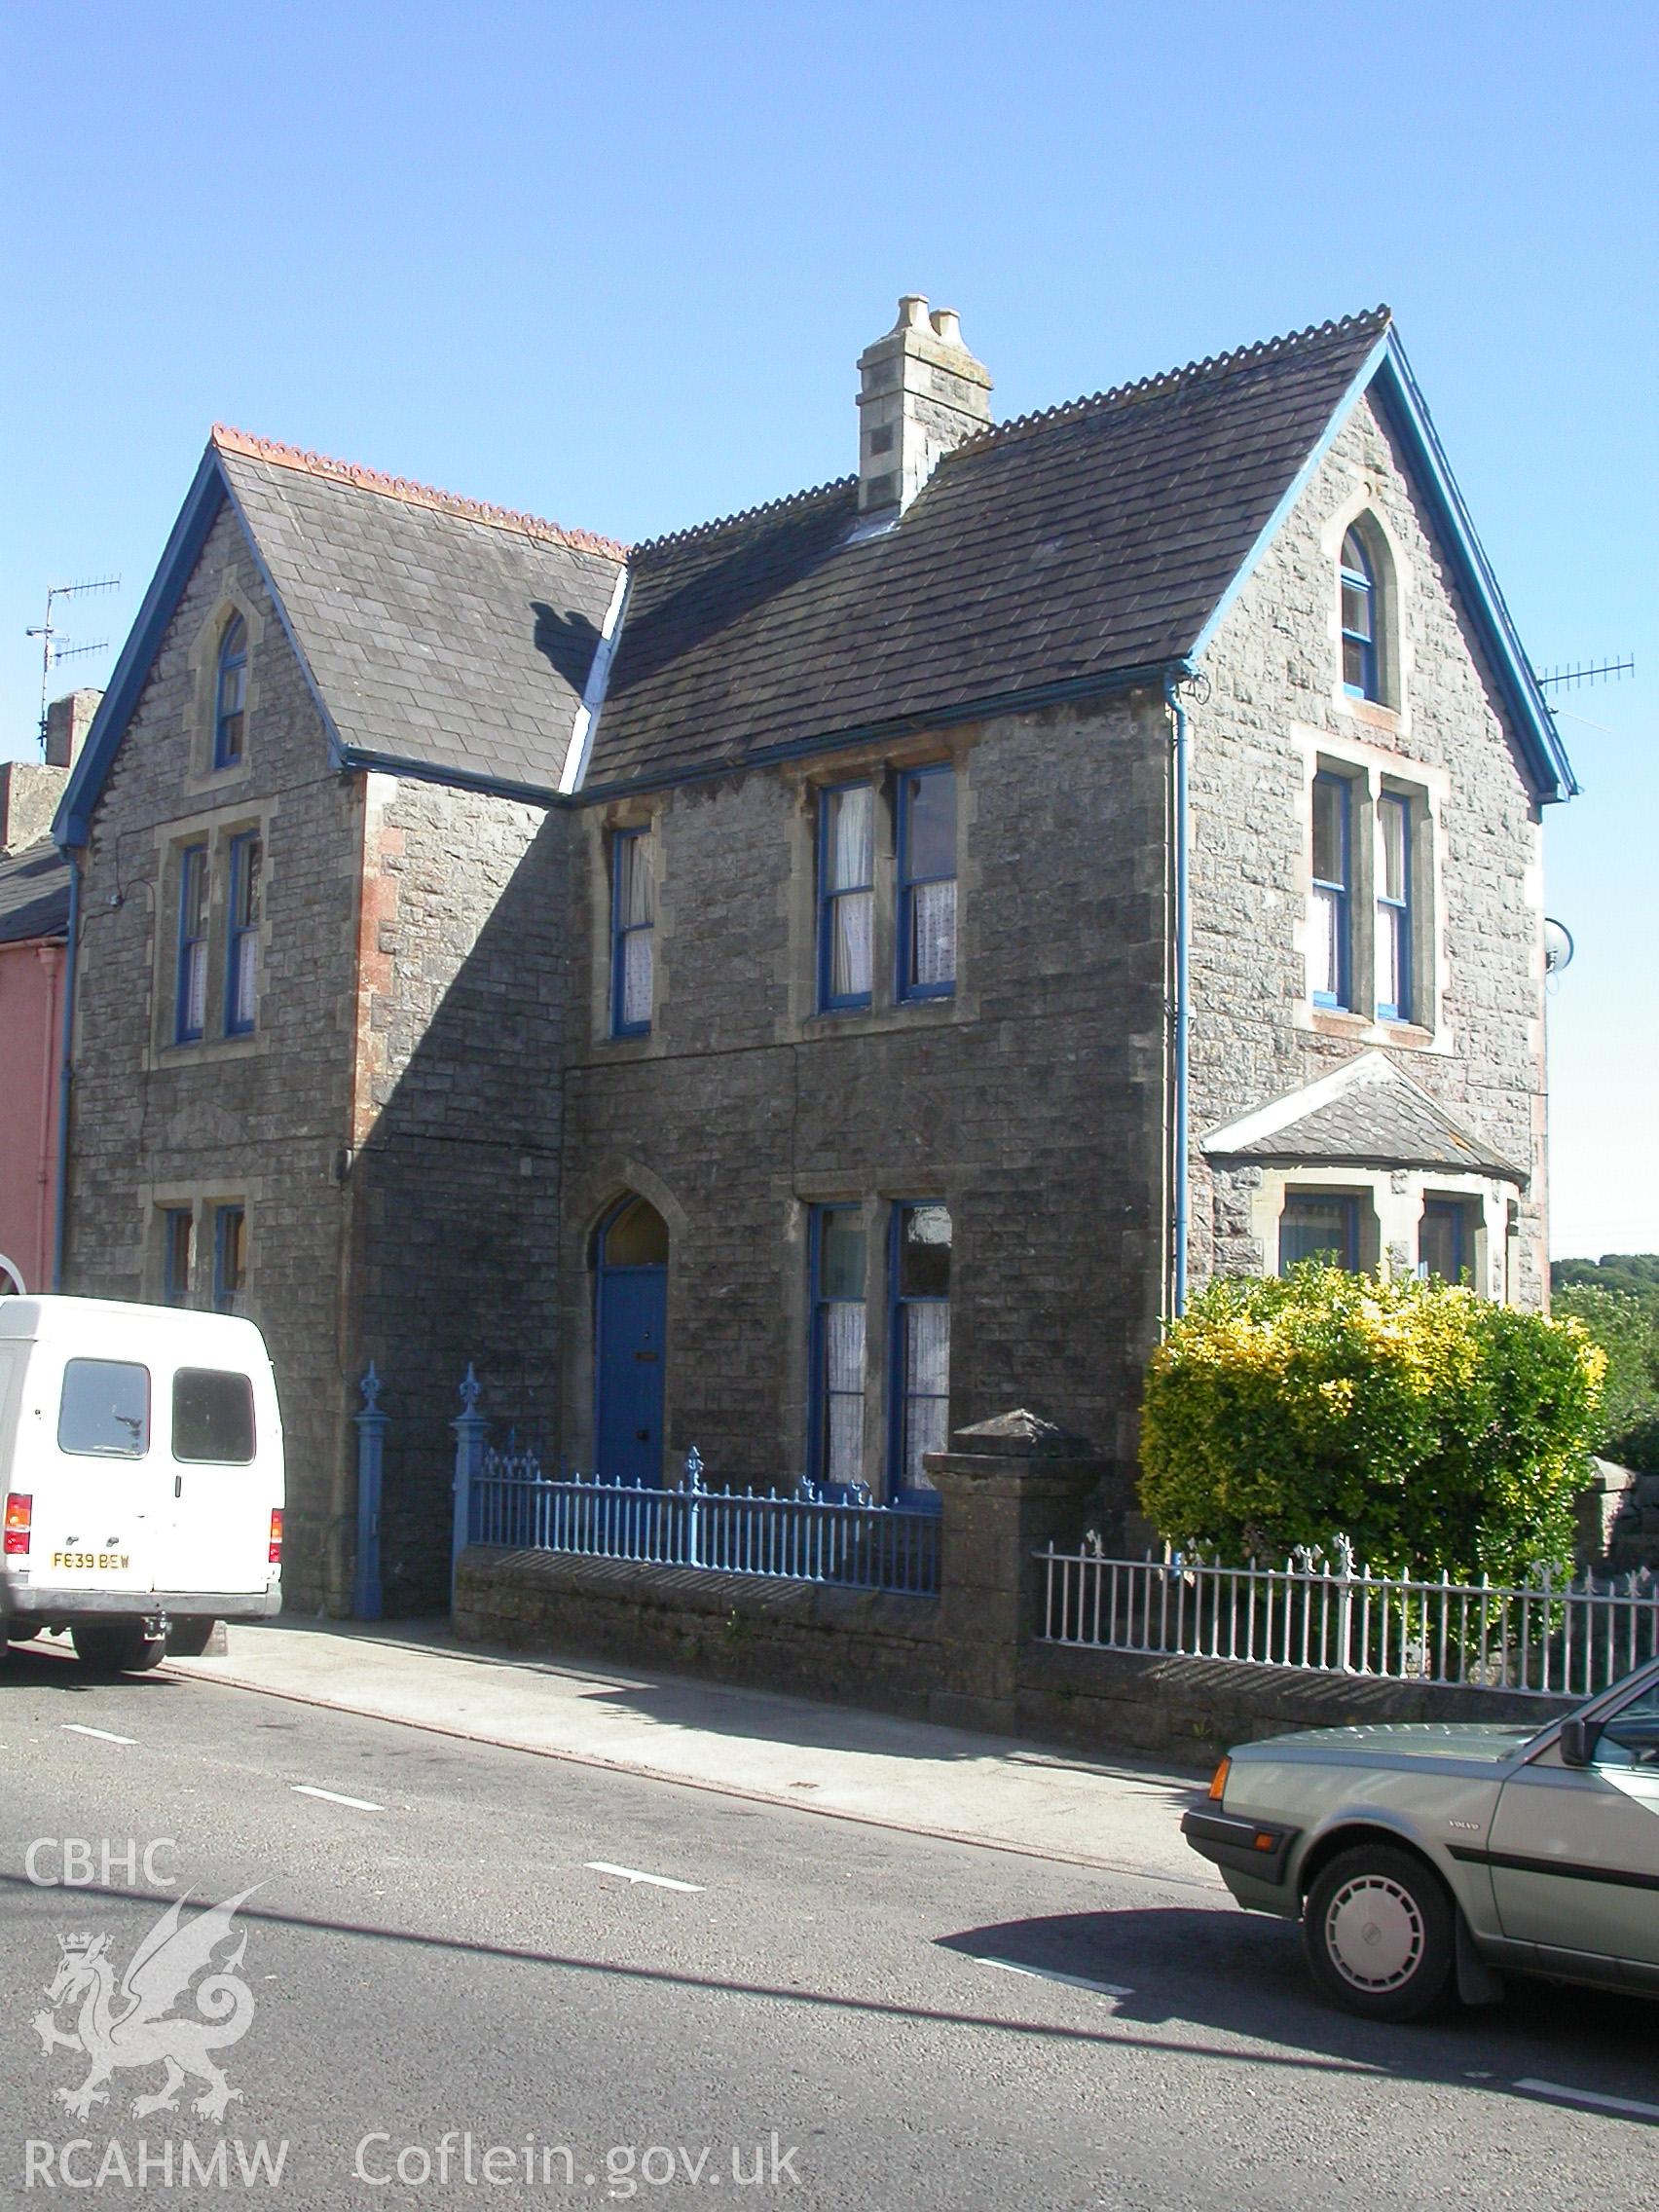 Minister's house, E of chapel, probably designed by Thomas Thomas, from the NW.